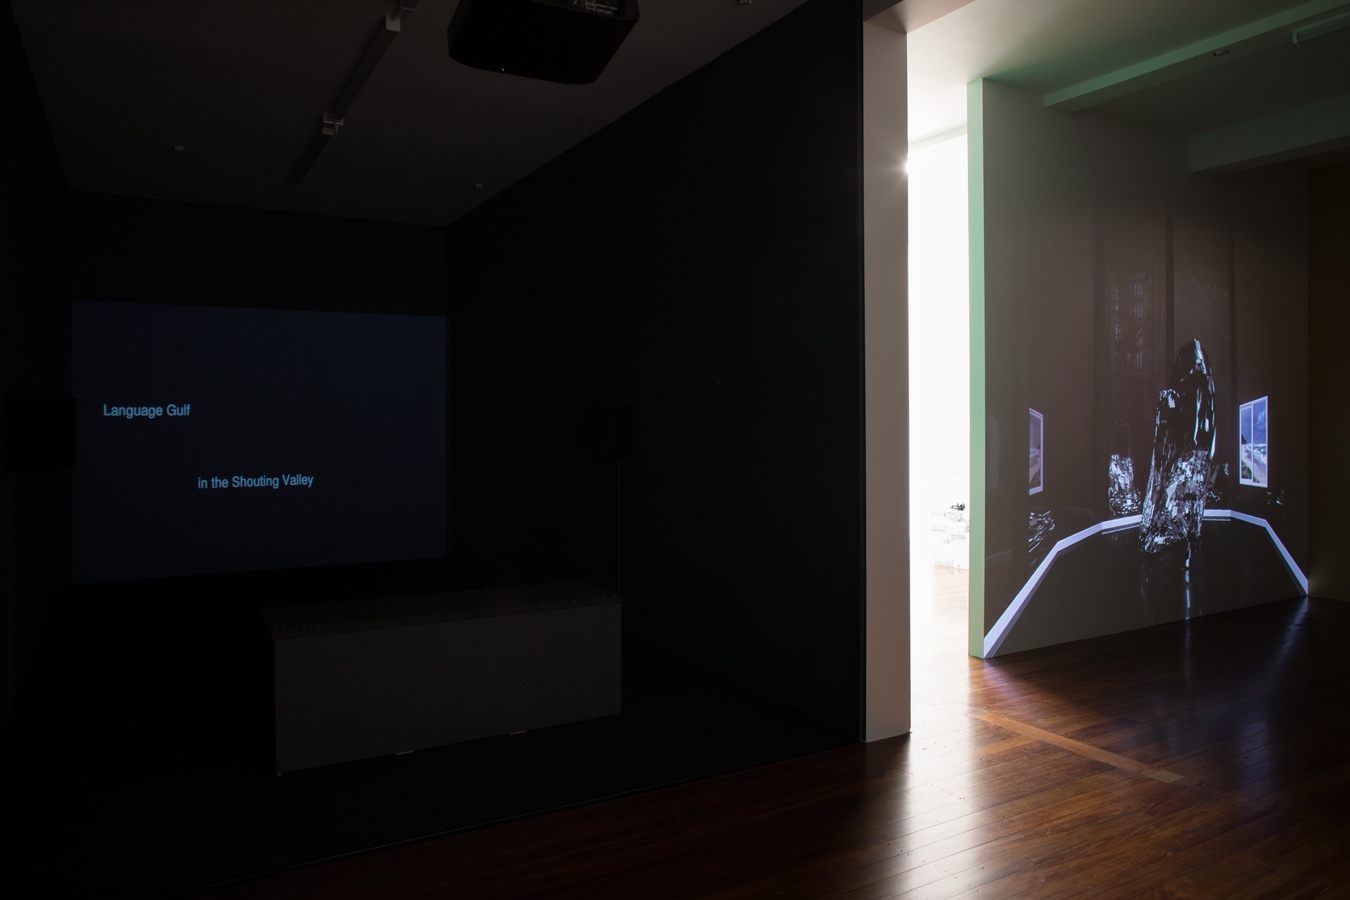 Image: The Shouting Valley: Interrogating the Borders Between Us (installation view), 2019, The Physics Room Contemporary Art Space. Photo: Janneth Gil.